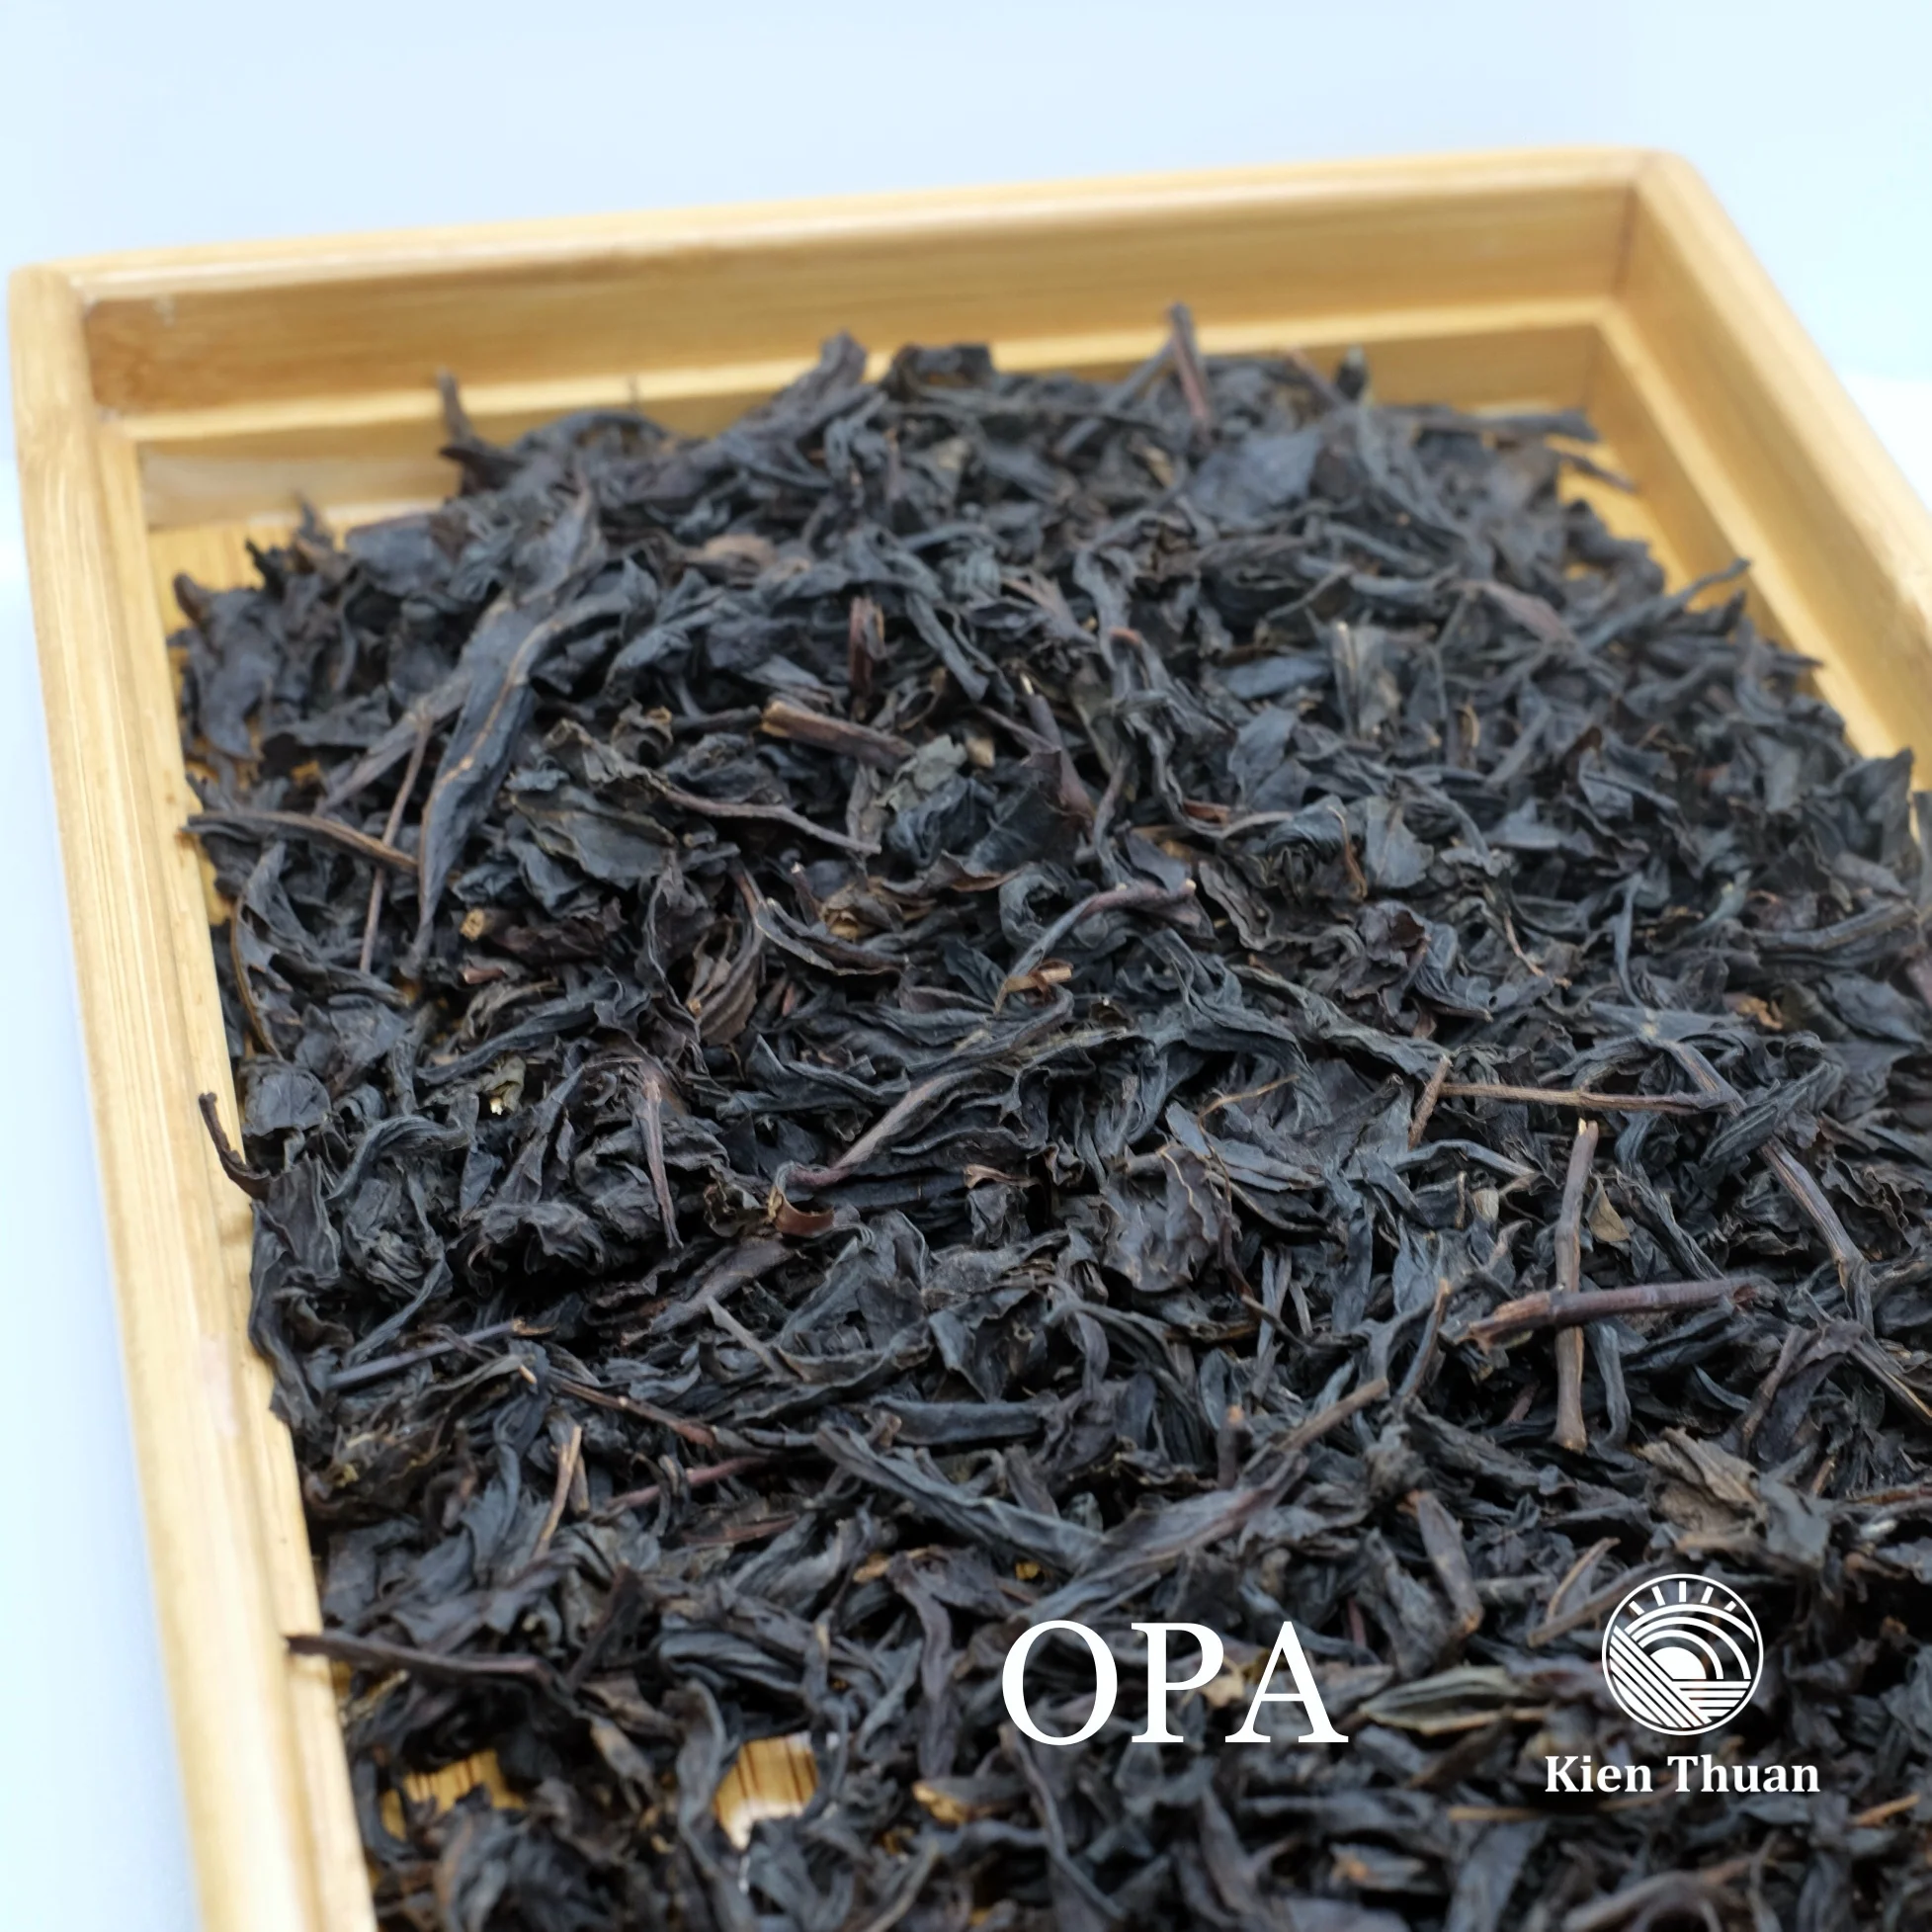 The best quality OPA ceylon black tea with long-lasting aroma and beautiful soup color from Vietnamese black tea manufacturer